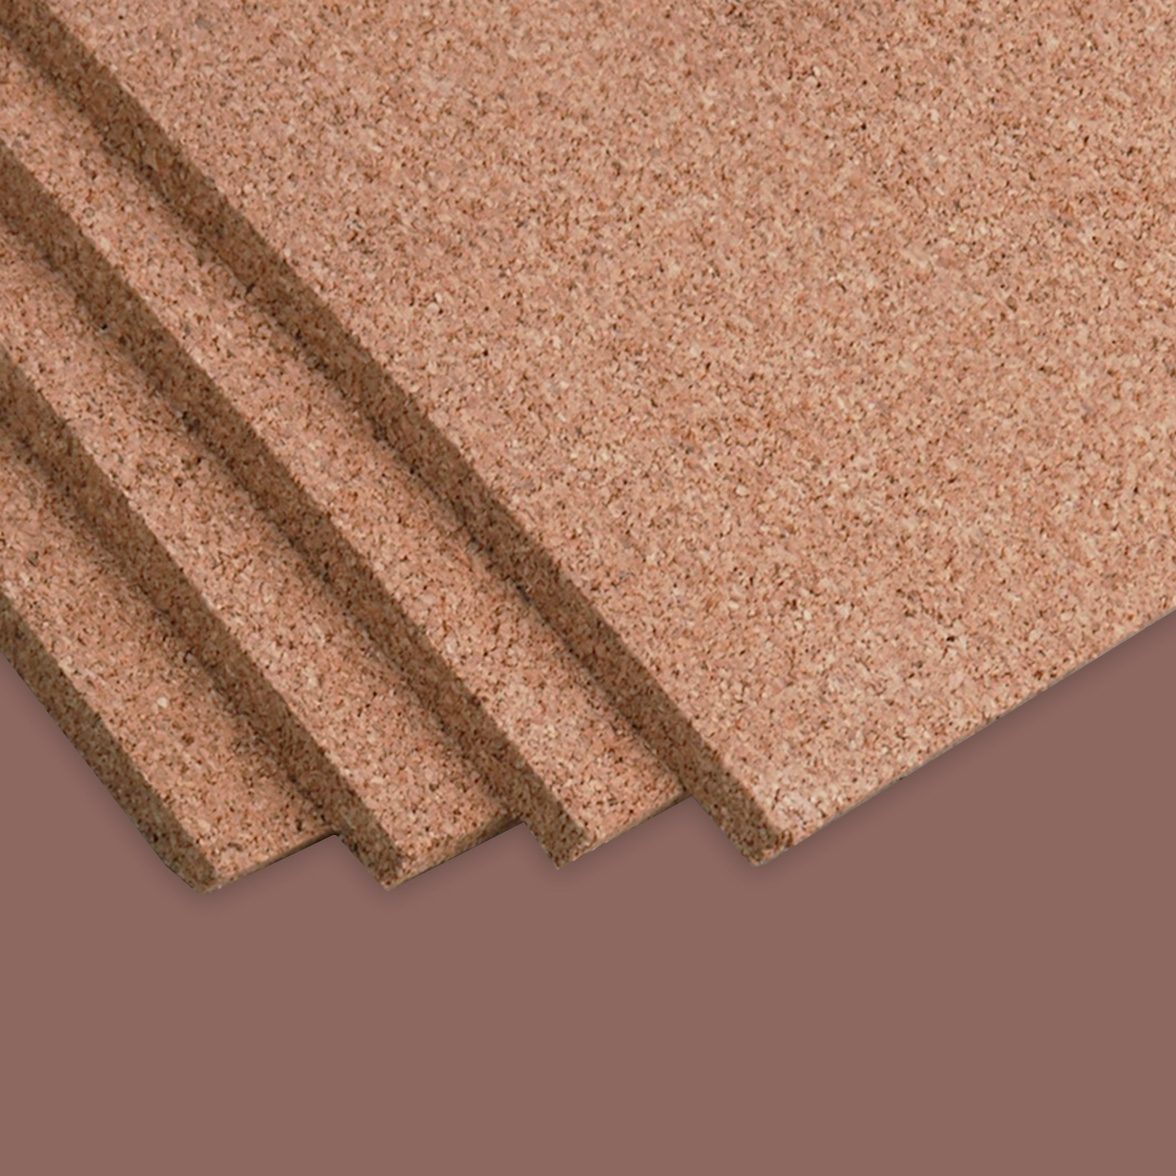 30"x54"x1/4" THICK CORK ROLL bulletin board panel sheet wall tile acoustic 